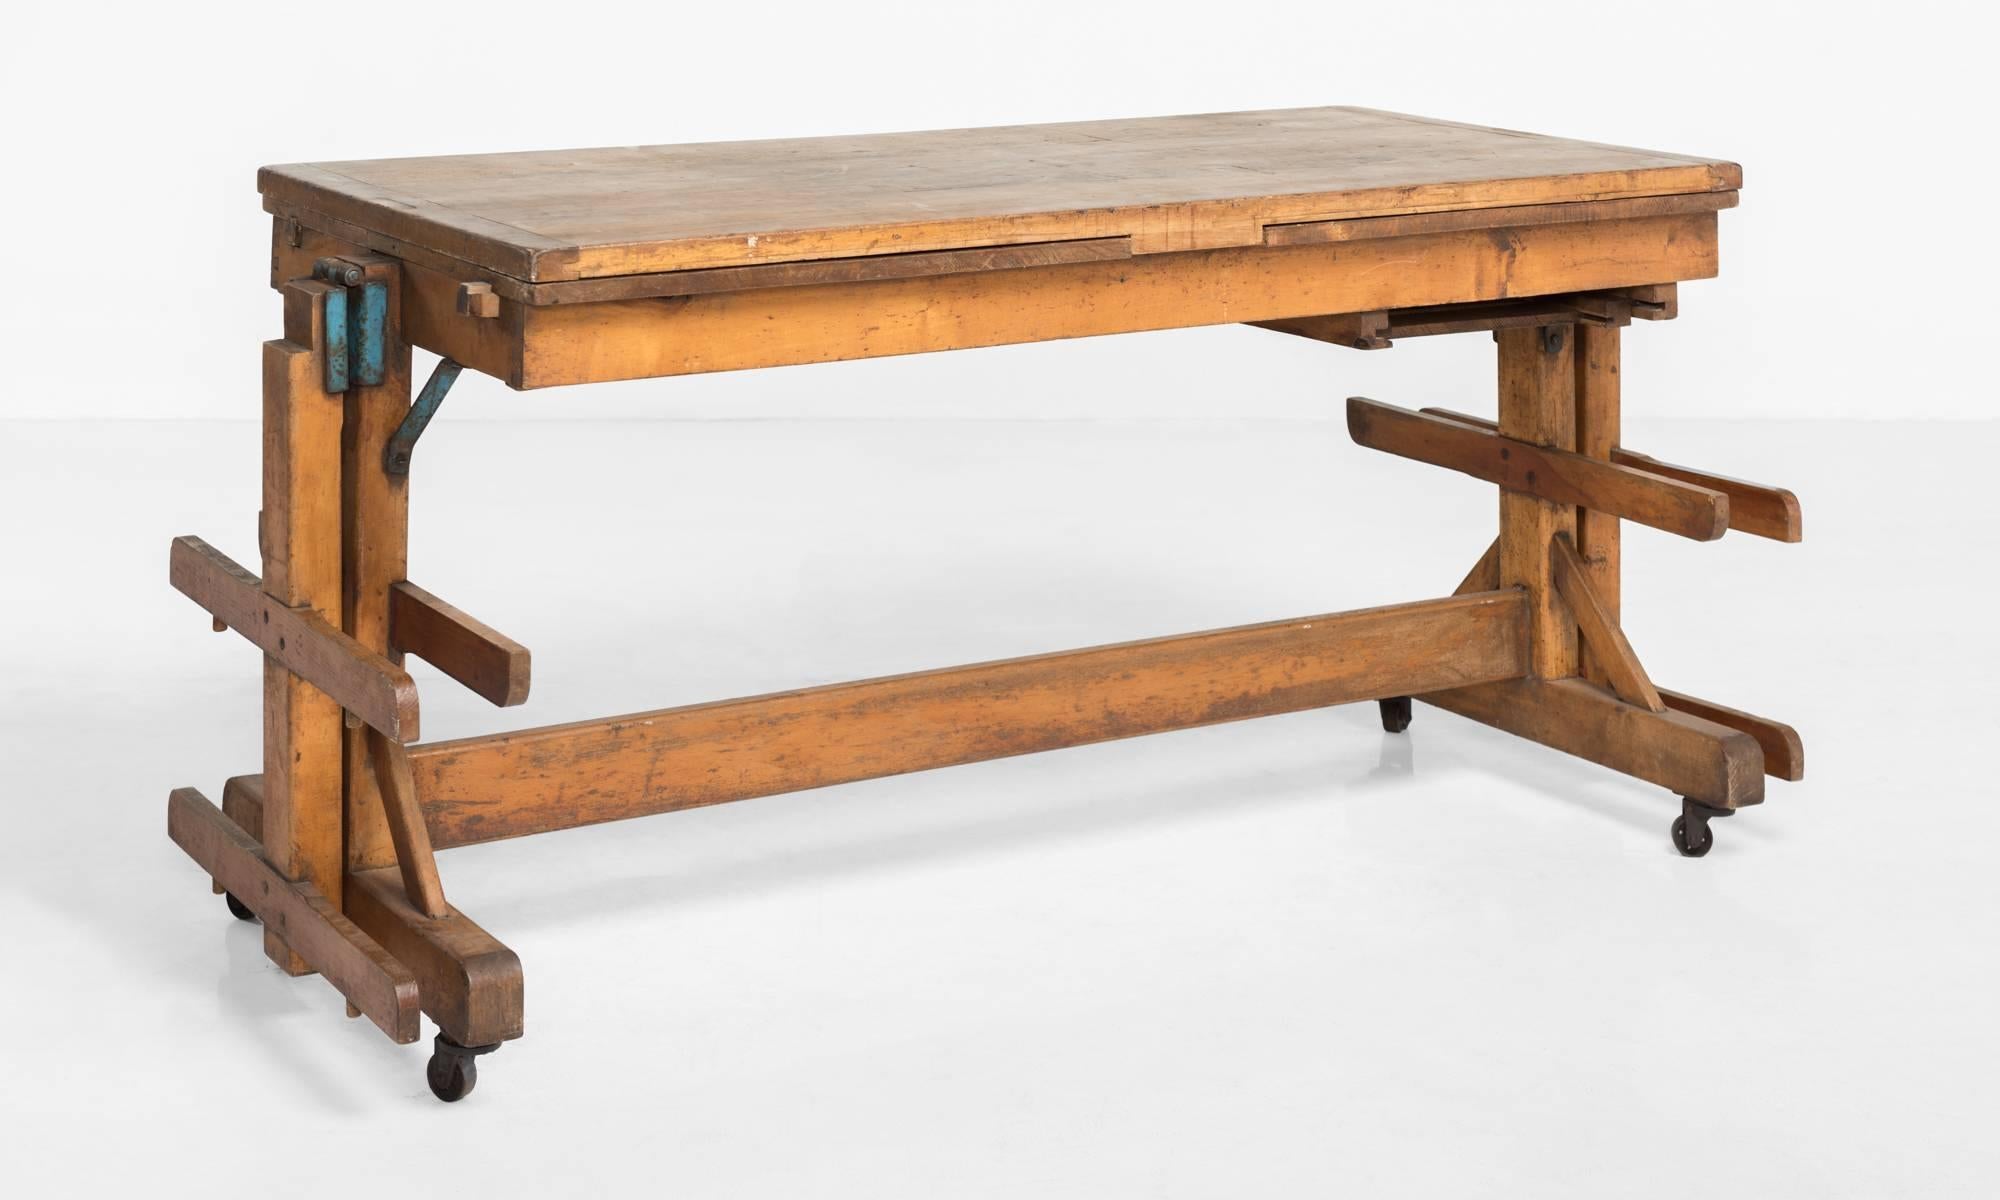 Metamorphic bakers table, circa 1900.

Unique work table with extending leaves, originally used in a bakery.

112.5